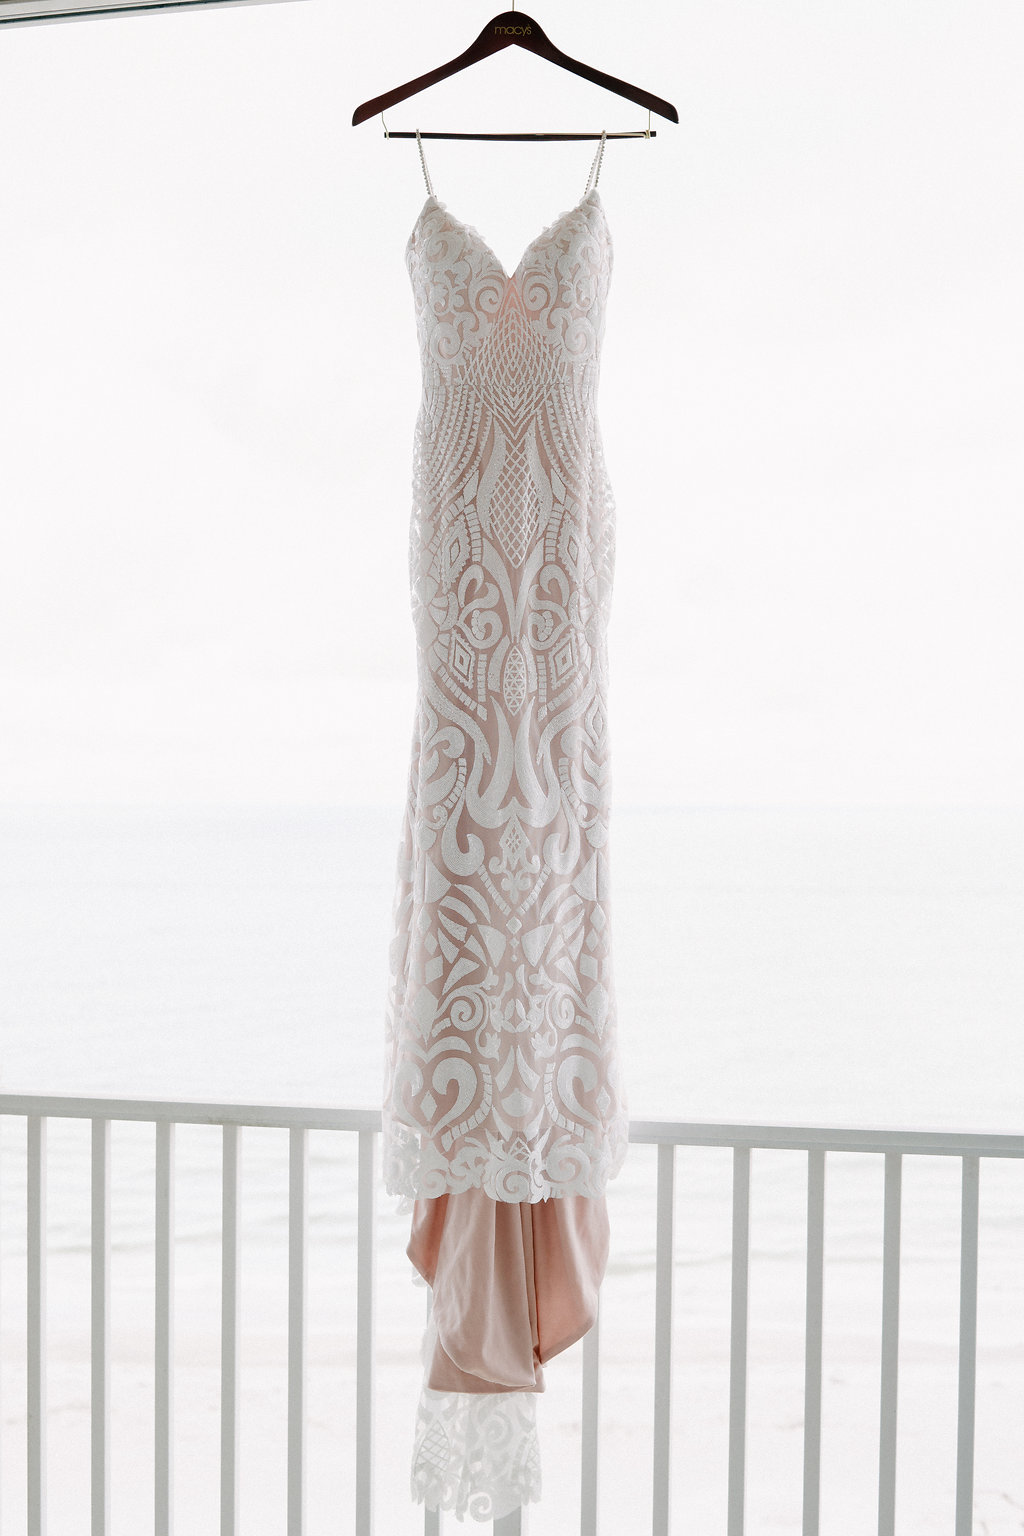 Plunging Neckline Ivory Sequin Lace and Nude Lining Spaghetti Strap Wedding Dress on Hanger | Tampa Bay Photographer Grind and Press Photography